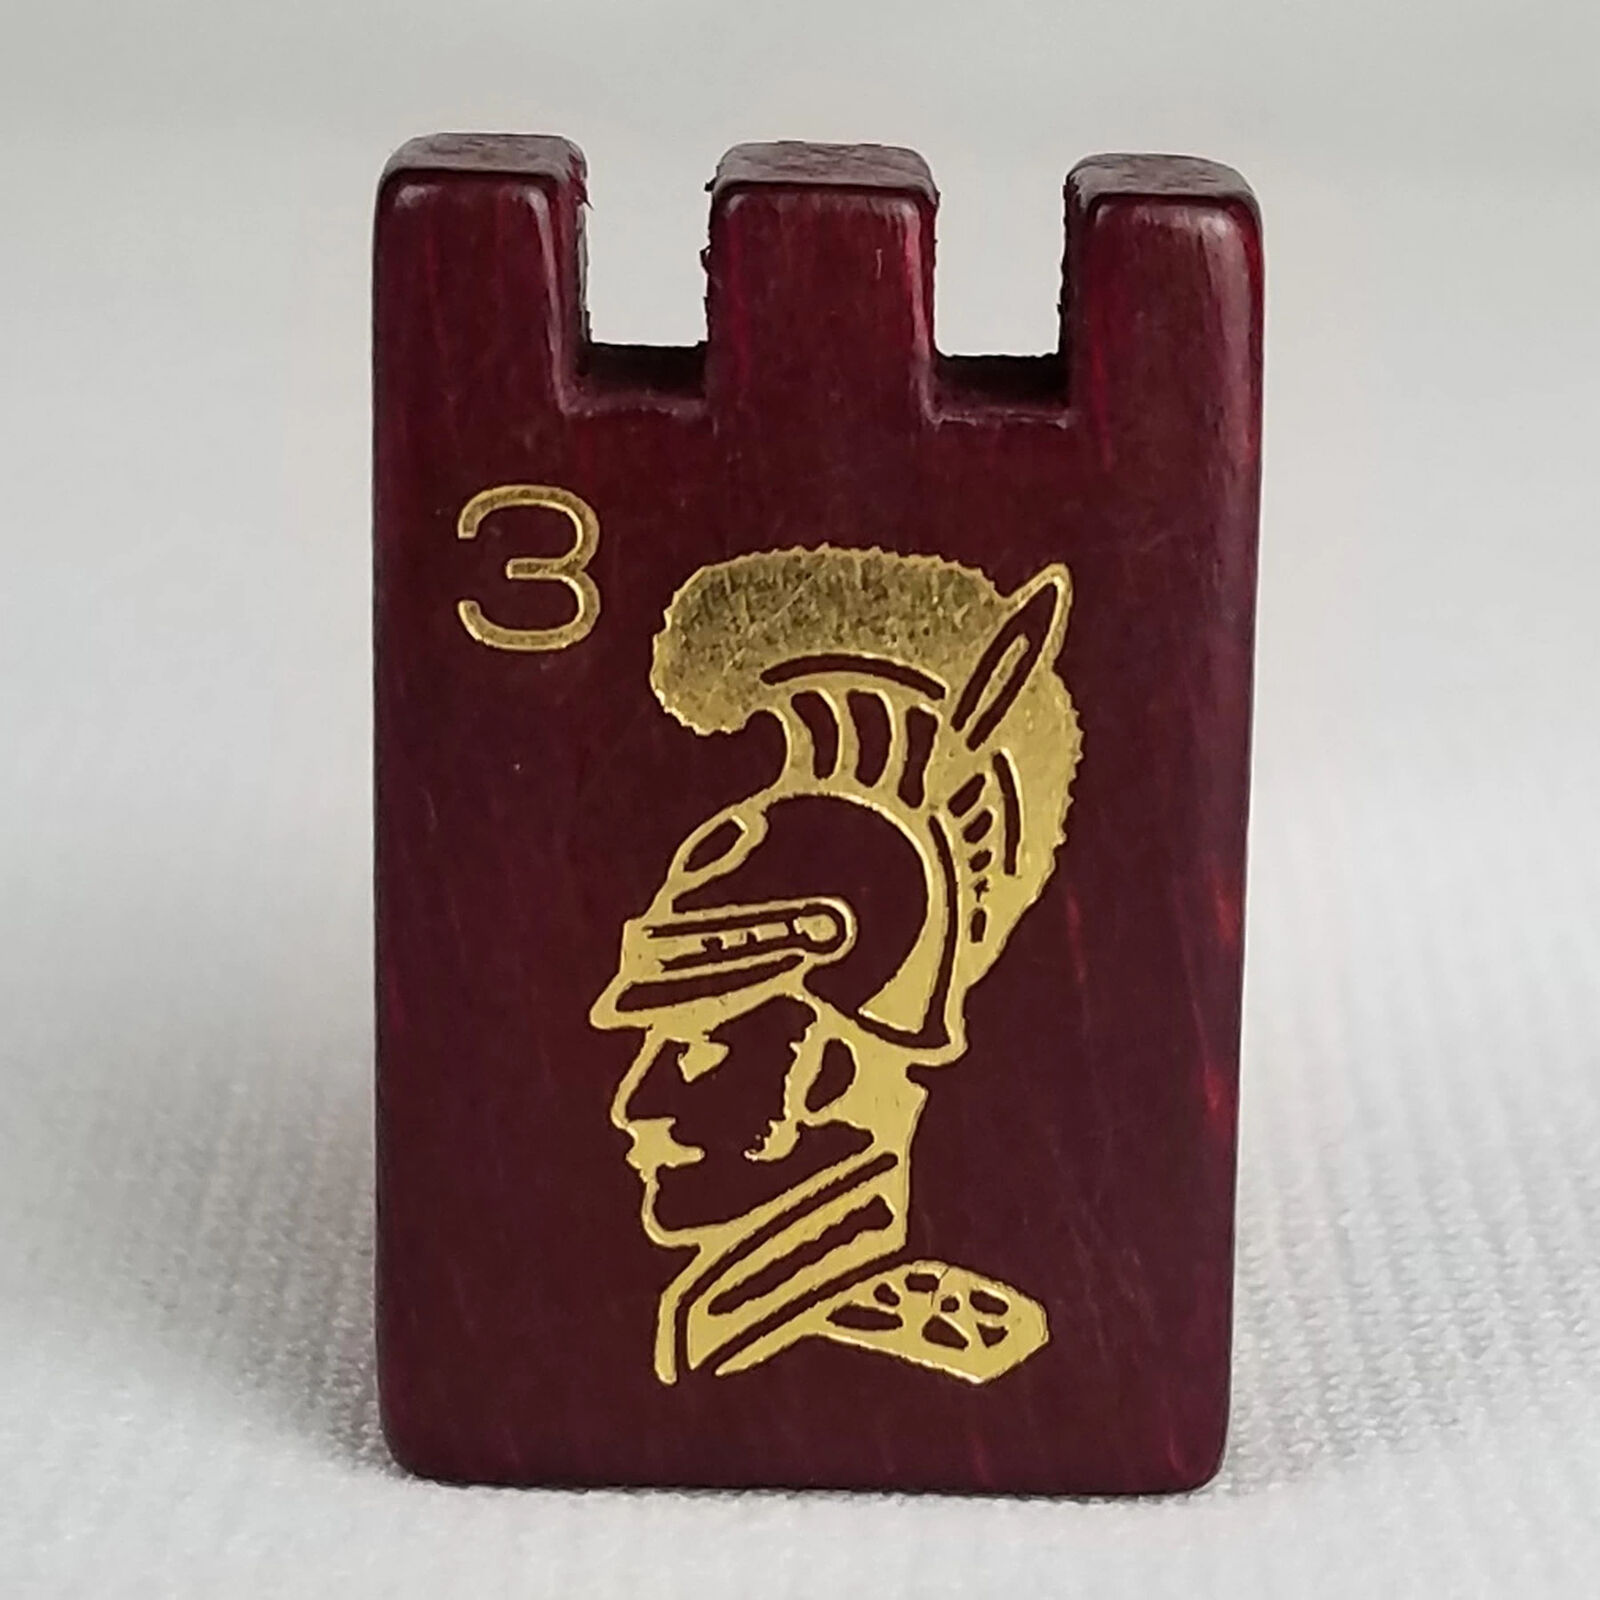 A game piece with a soldier's head and the number 3 on it.